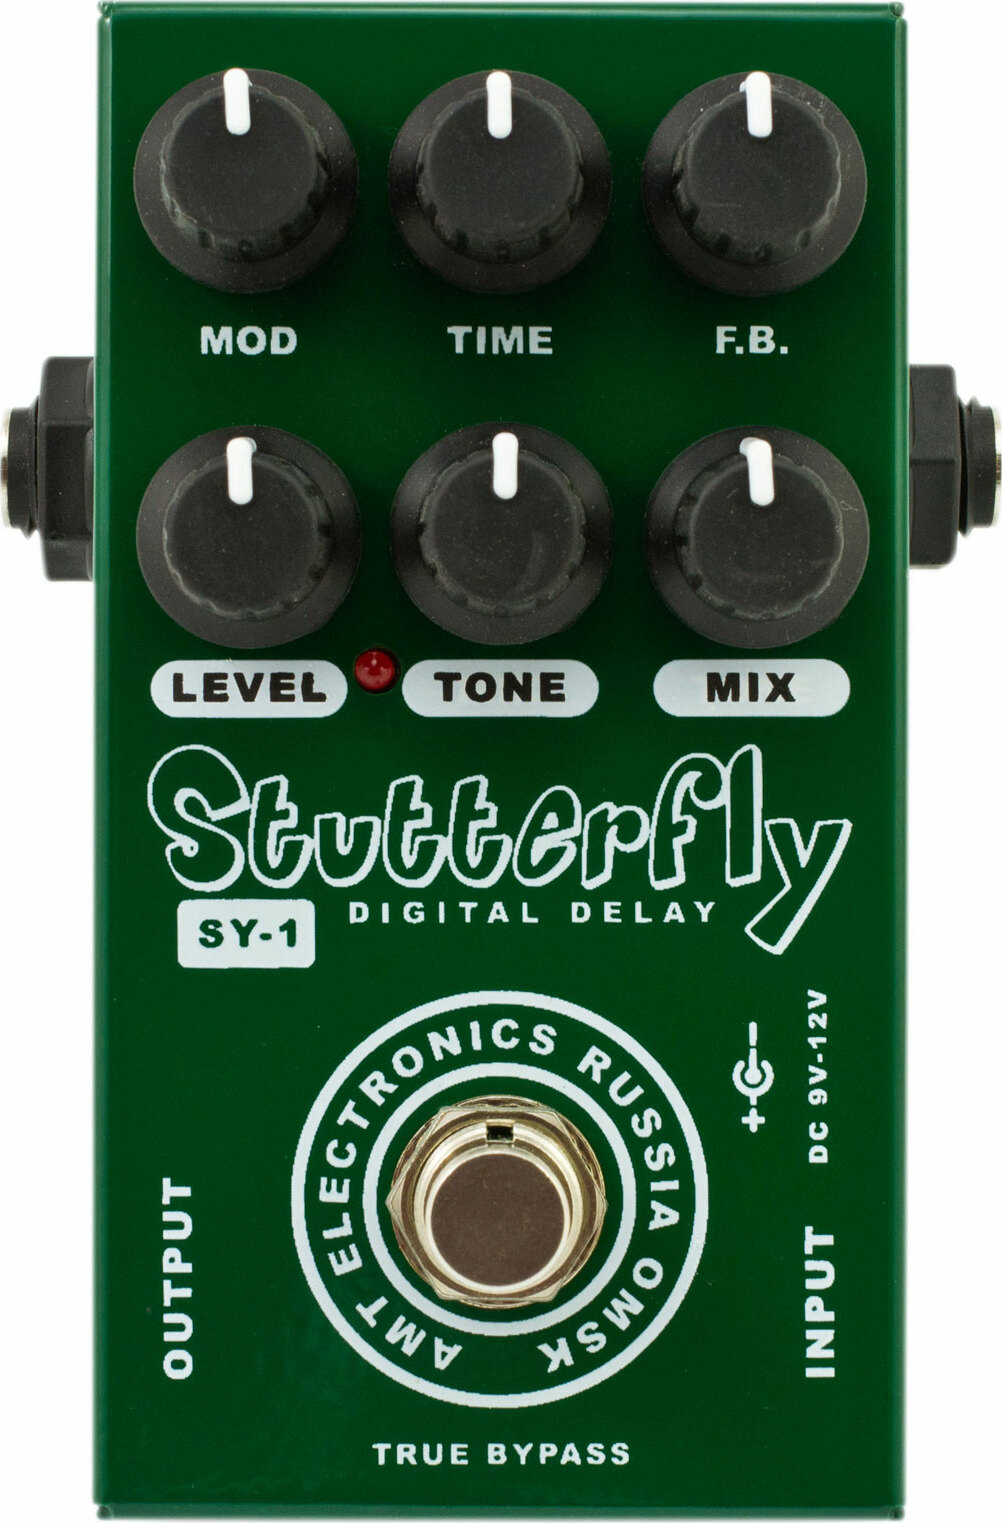 Amt Electronics Sy1 Stutterfly Delay Digital - Reverb/delay/echo effect pedaal - Main picture